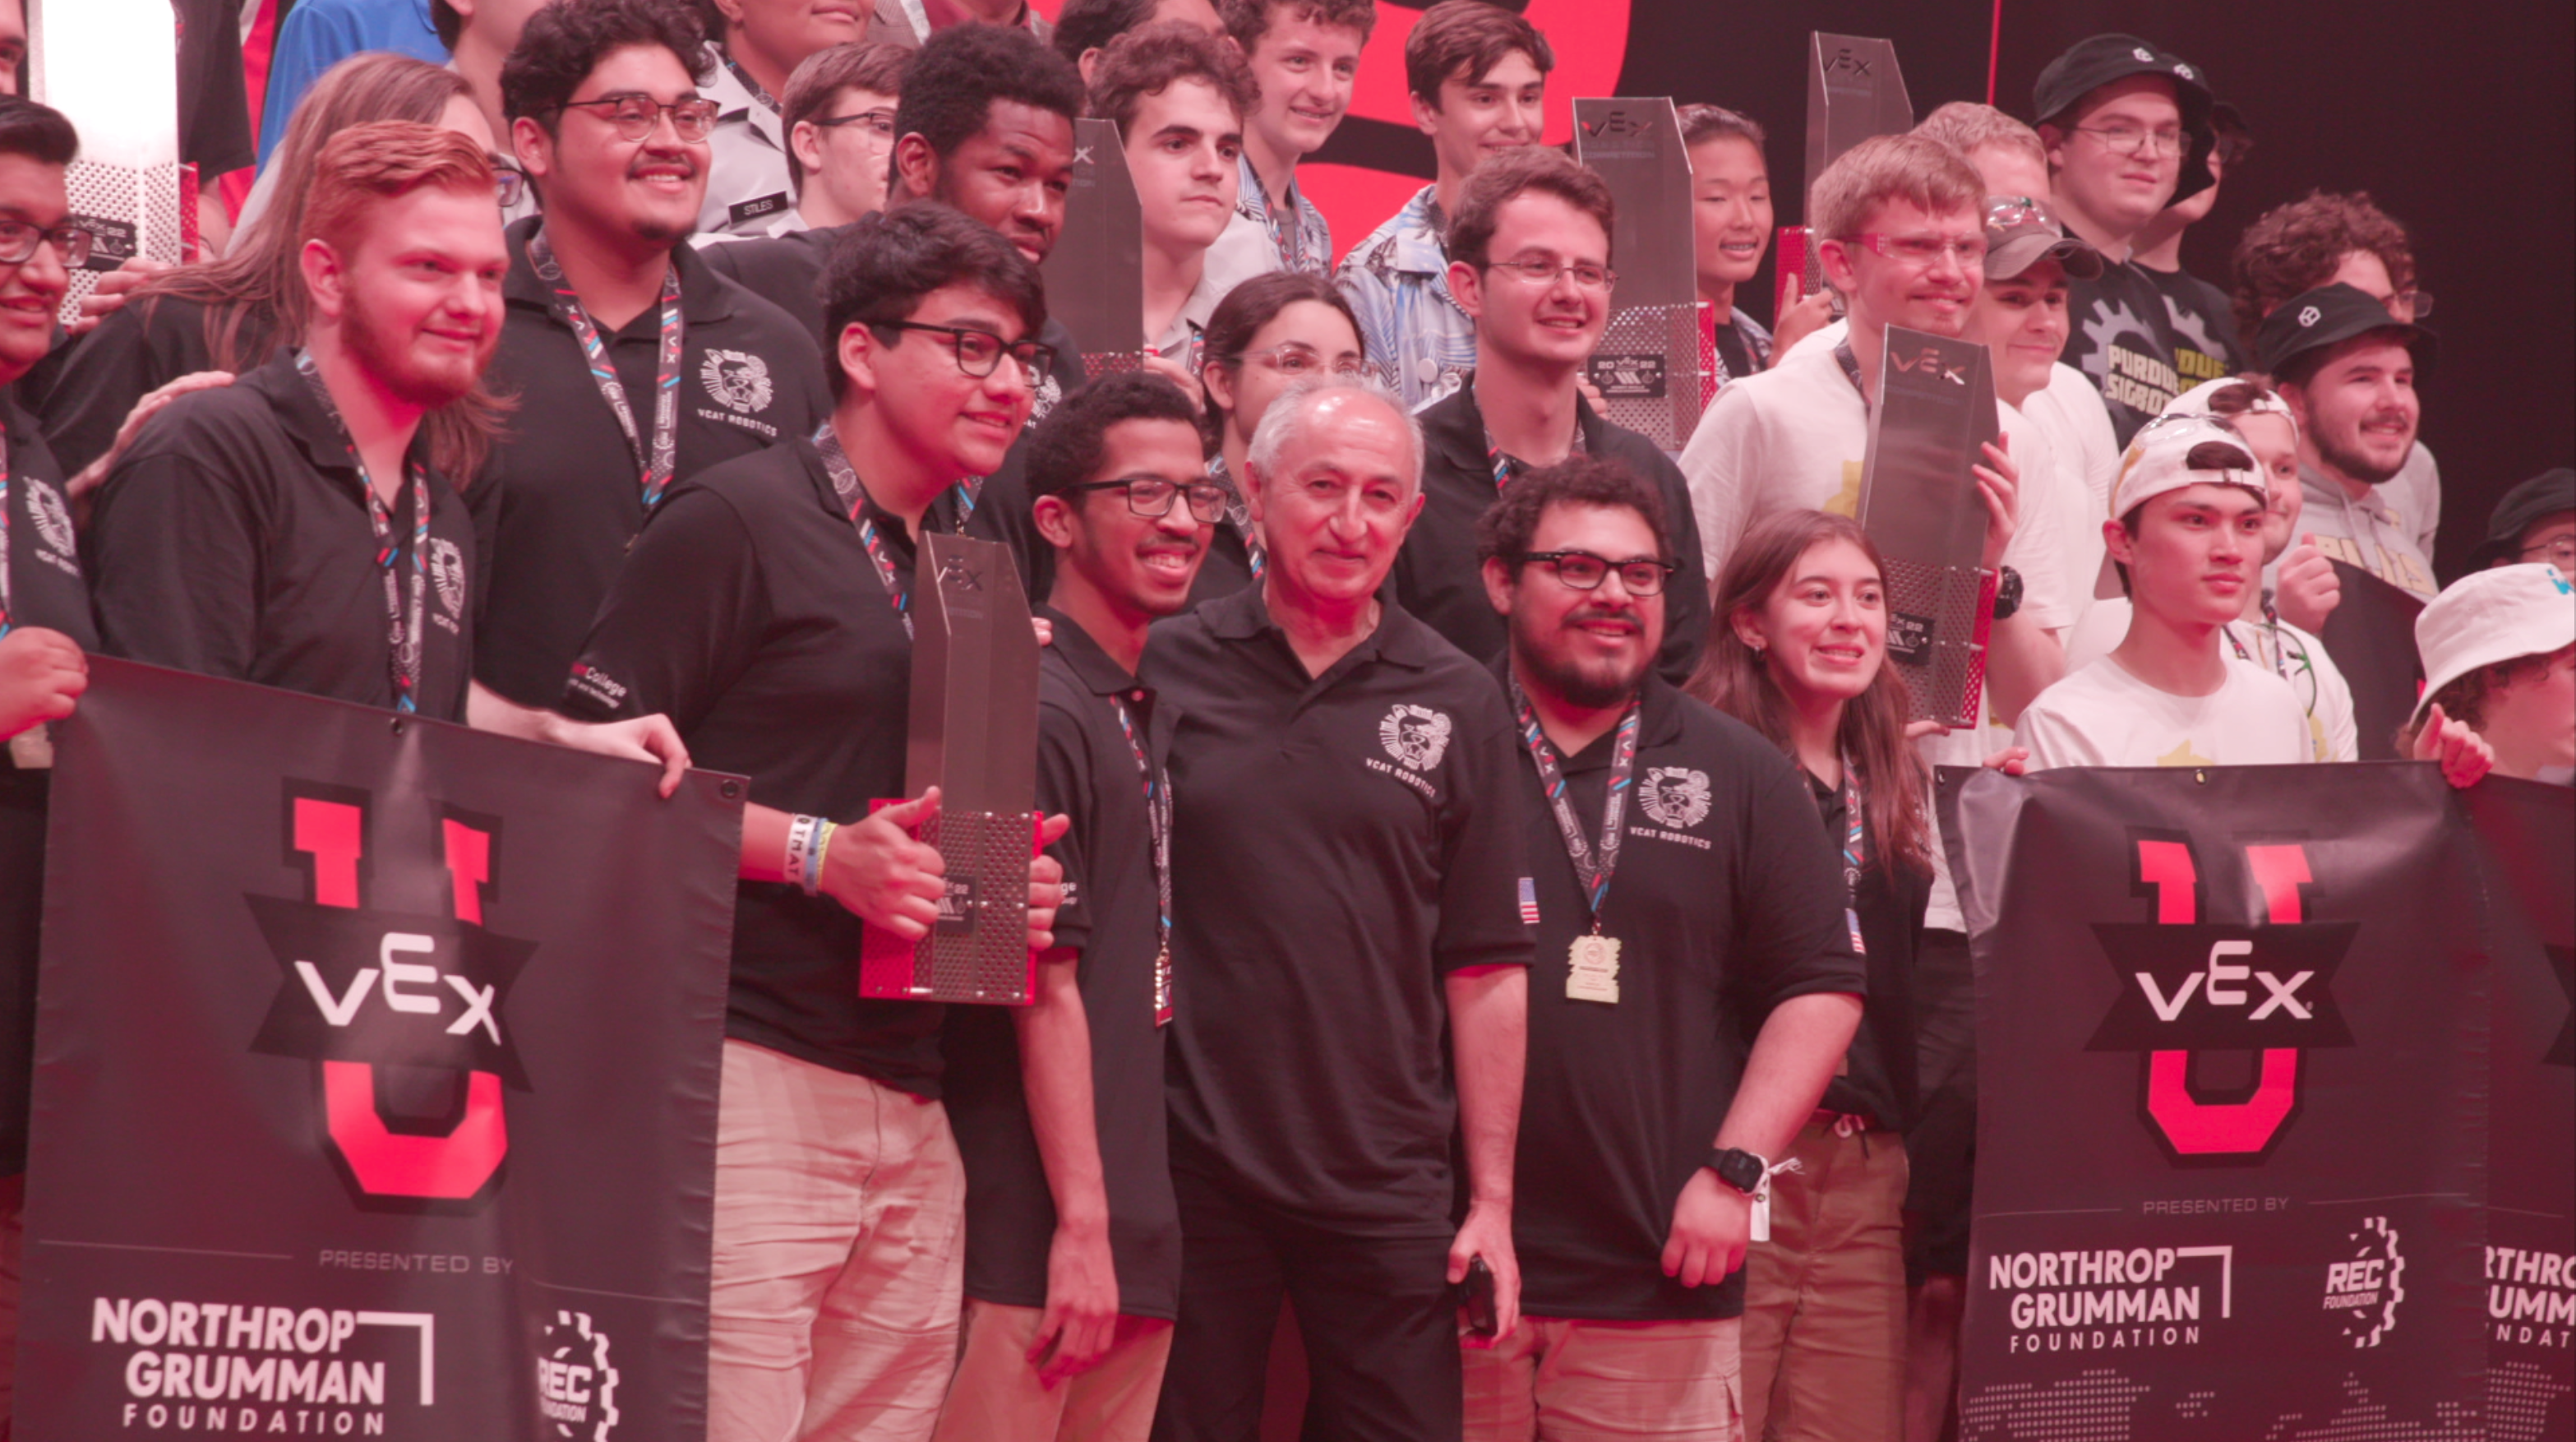 Vaughn College’s Robotics Team Earns Excellence Award at VEX U Worlds Competition